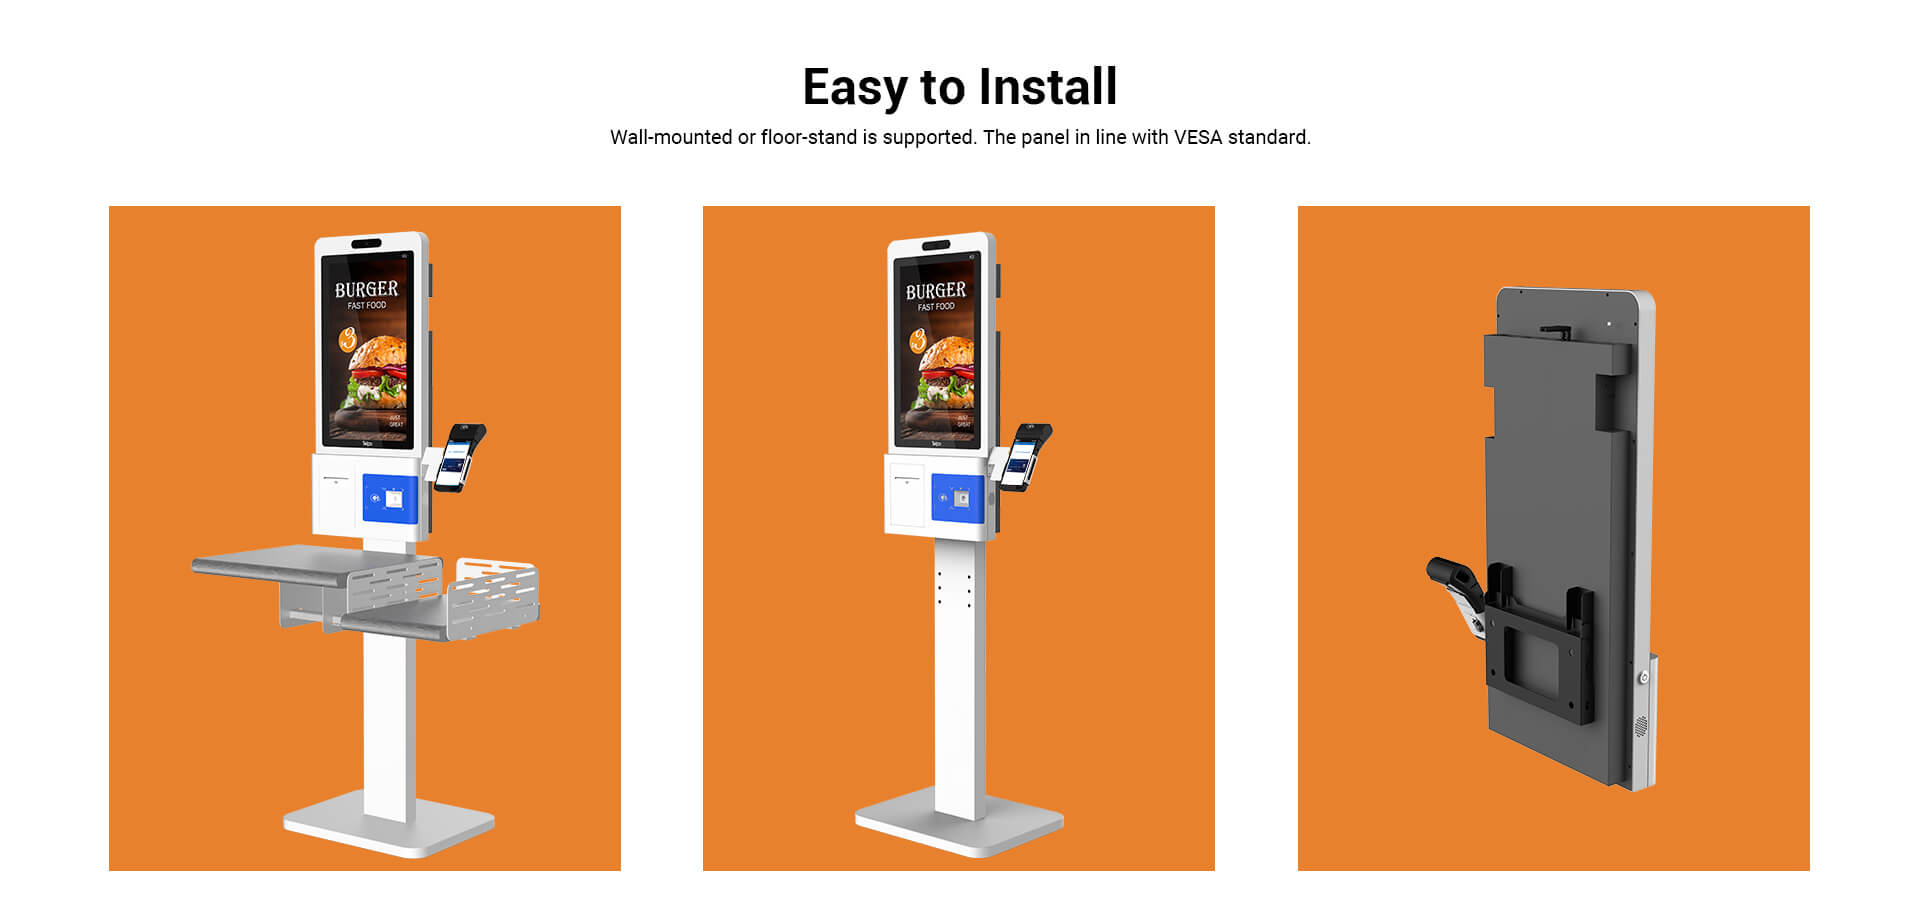 wall-mounted self ordering and payment kiosk